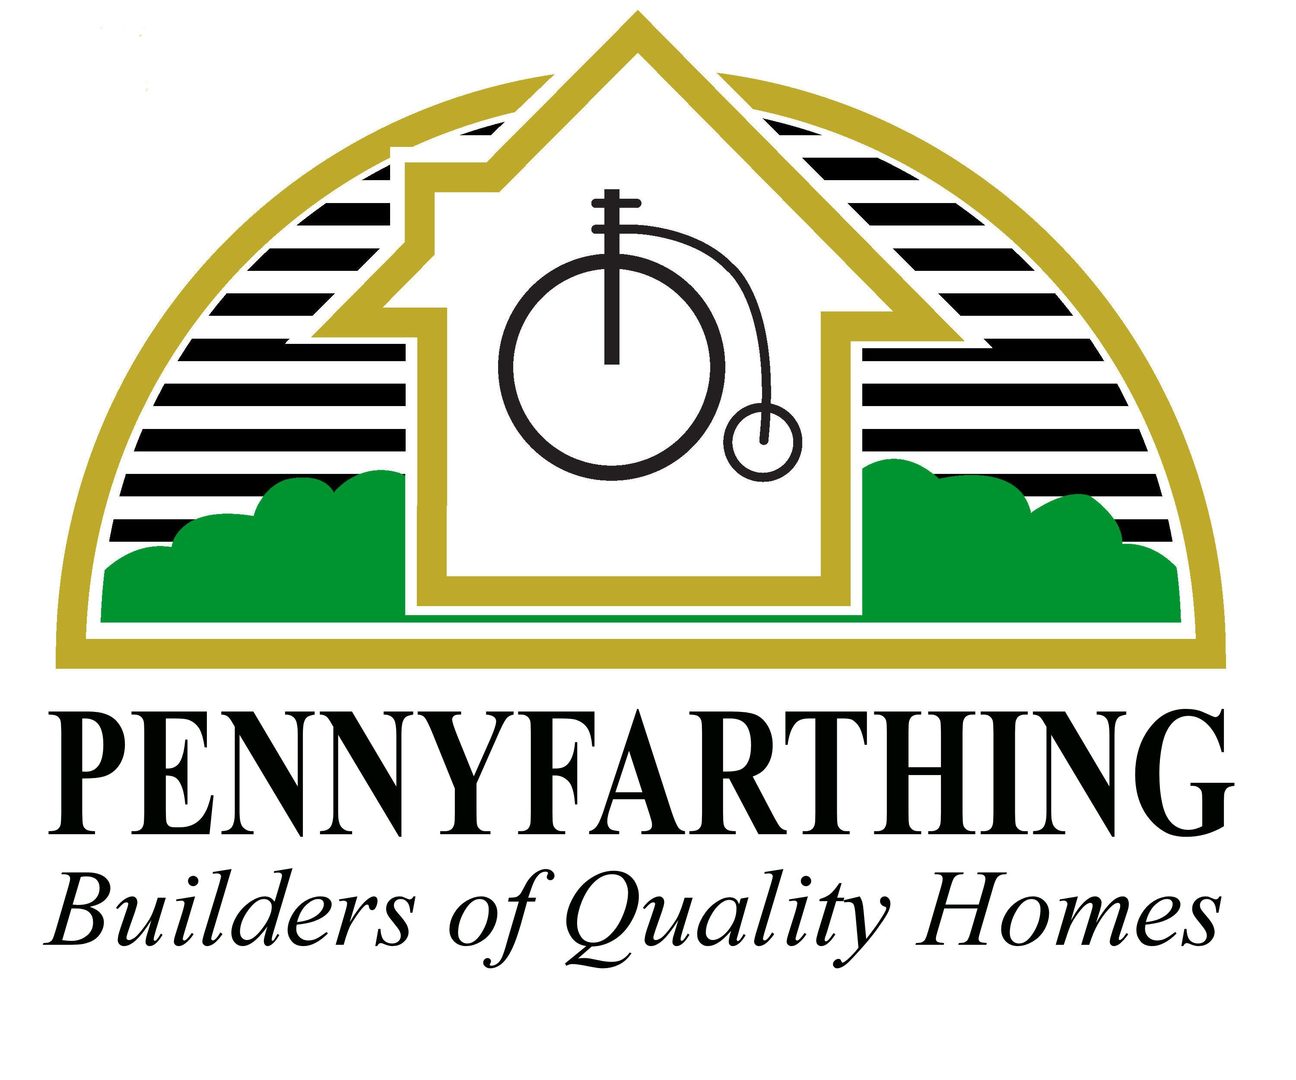 Pennyfarthing Homes Sponsoring the West Ring for 2022